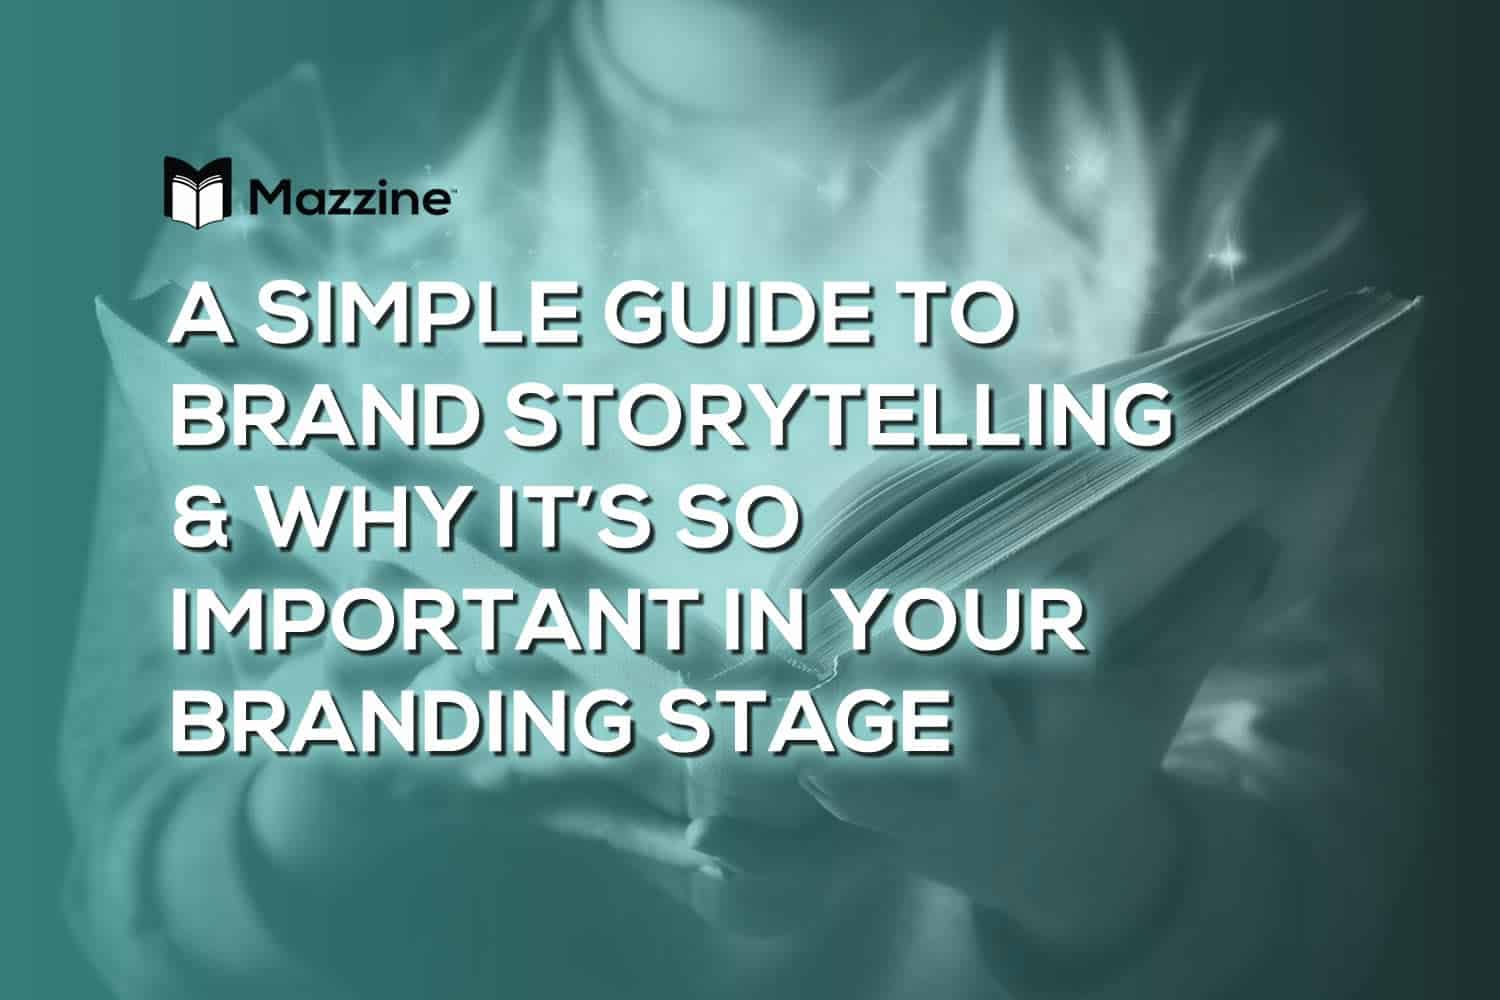 A-Simple-Guide-to-Brand-Storytelling-and-Why-its-so-Important-in-Your-Branding-Stage1